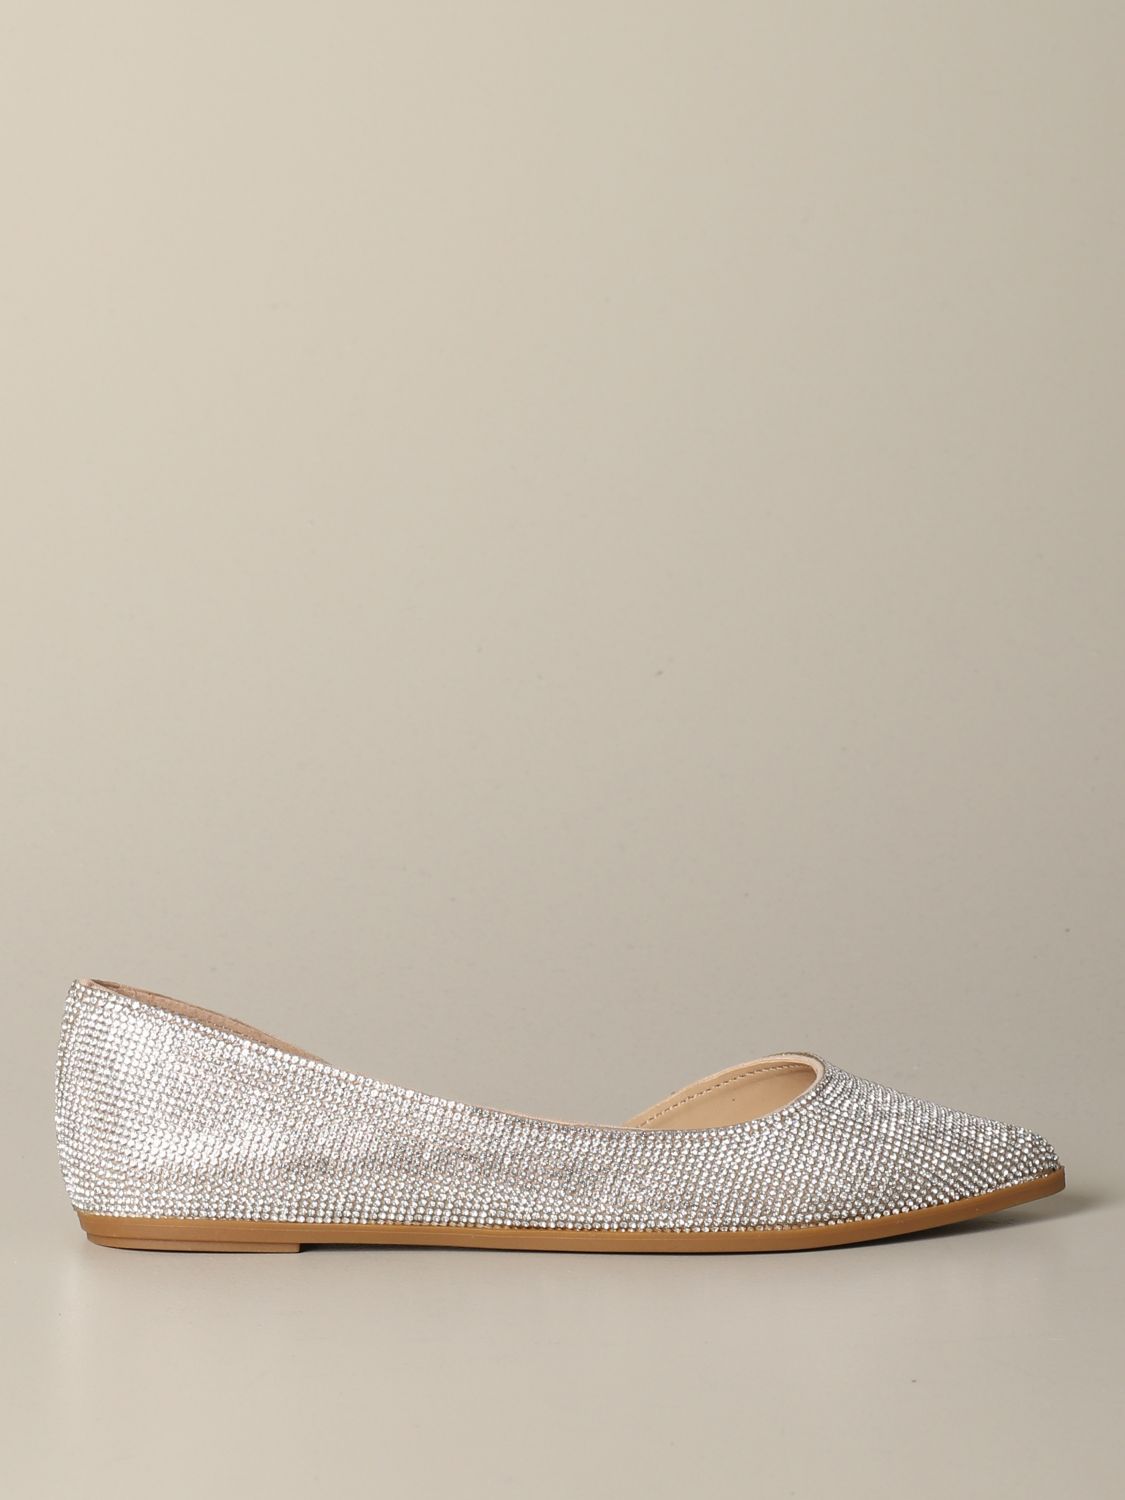 Steve Madden pointed toe ballet flat with micro rhinestones | Ballet ...